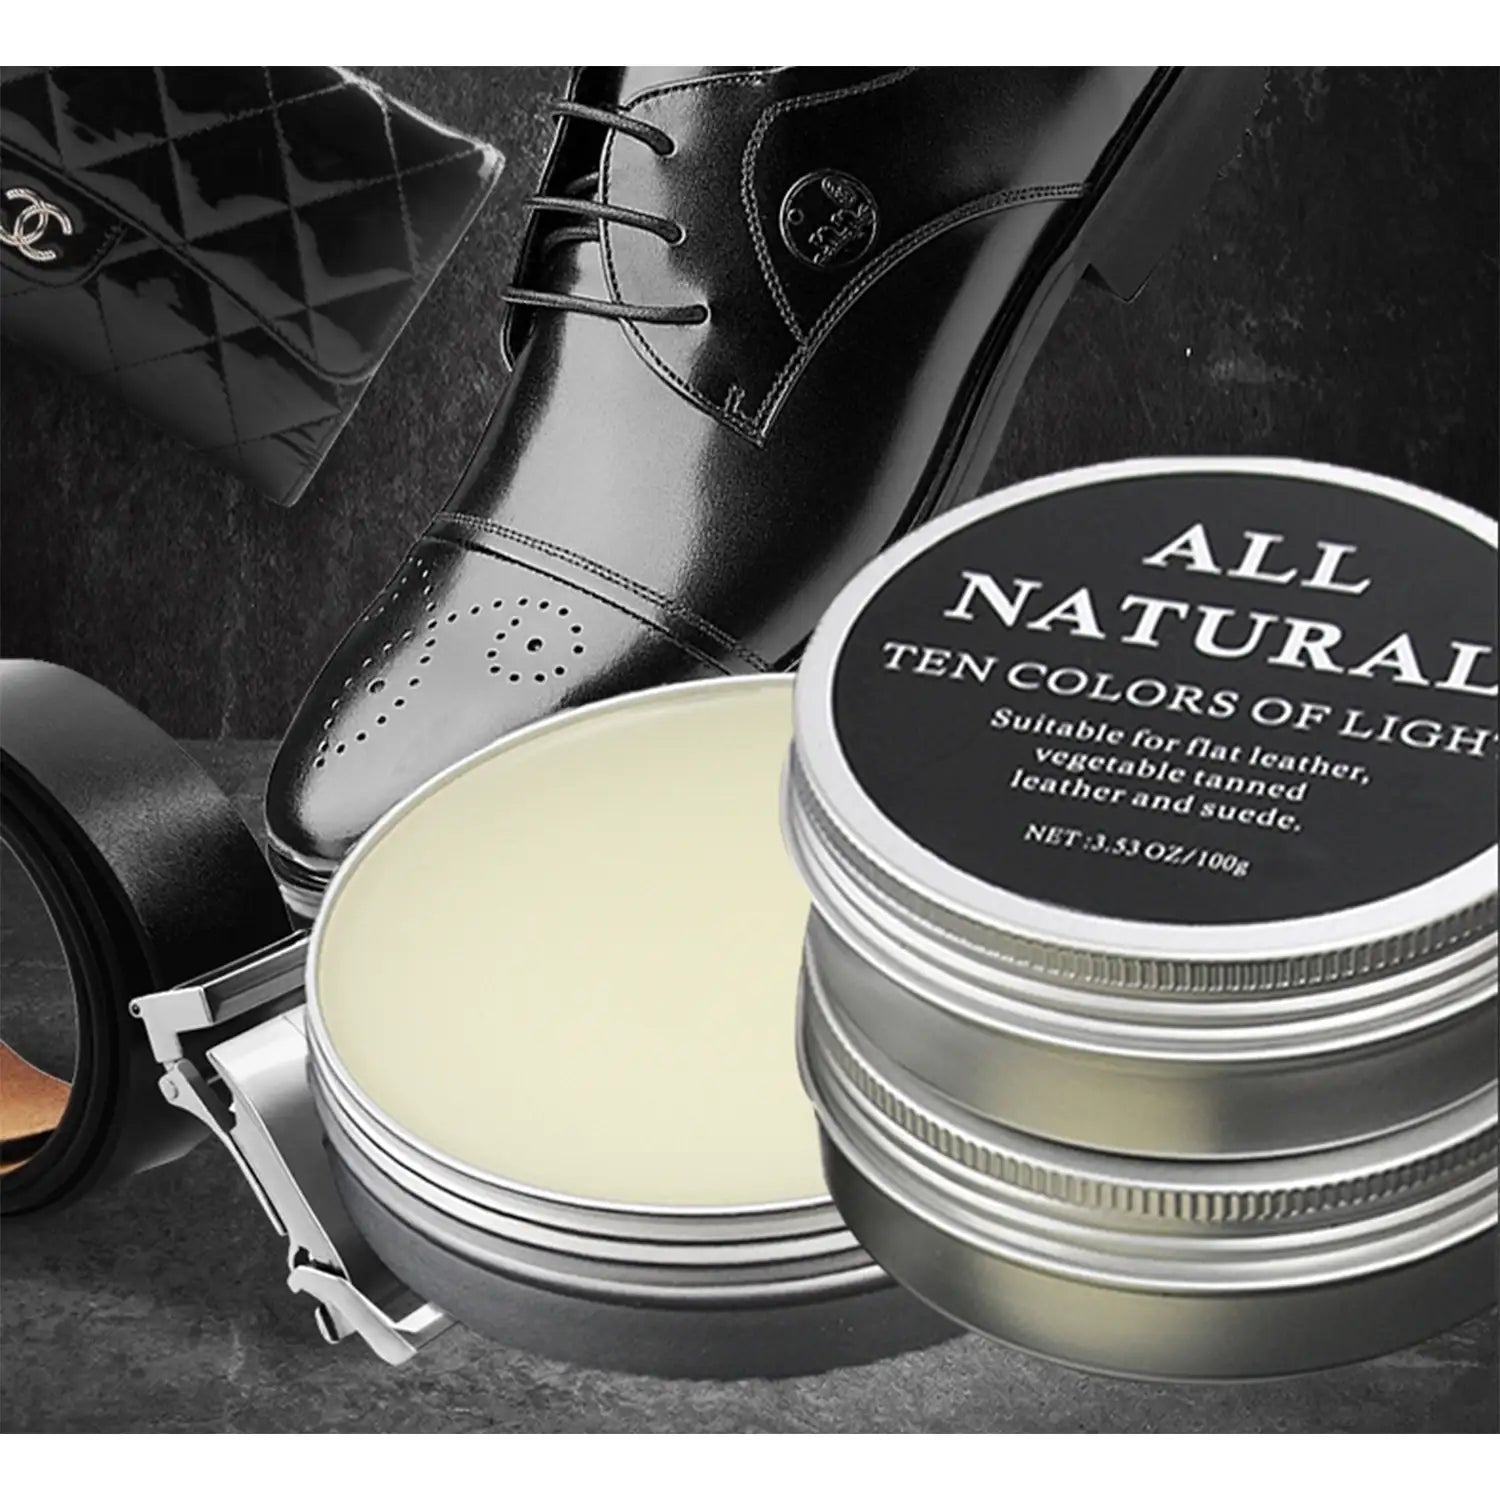 Genuine Leather Mink Oil Cream for Leather Care and Maintenance, Leather Conditioner Nourishing Balm for Leather Clothing and Accessories, Premium Genuine Leather Mink Oil Cream for Handbags Shoes